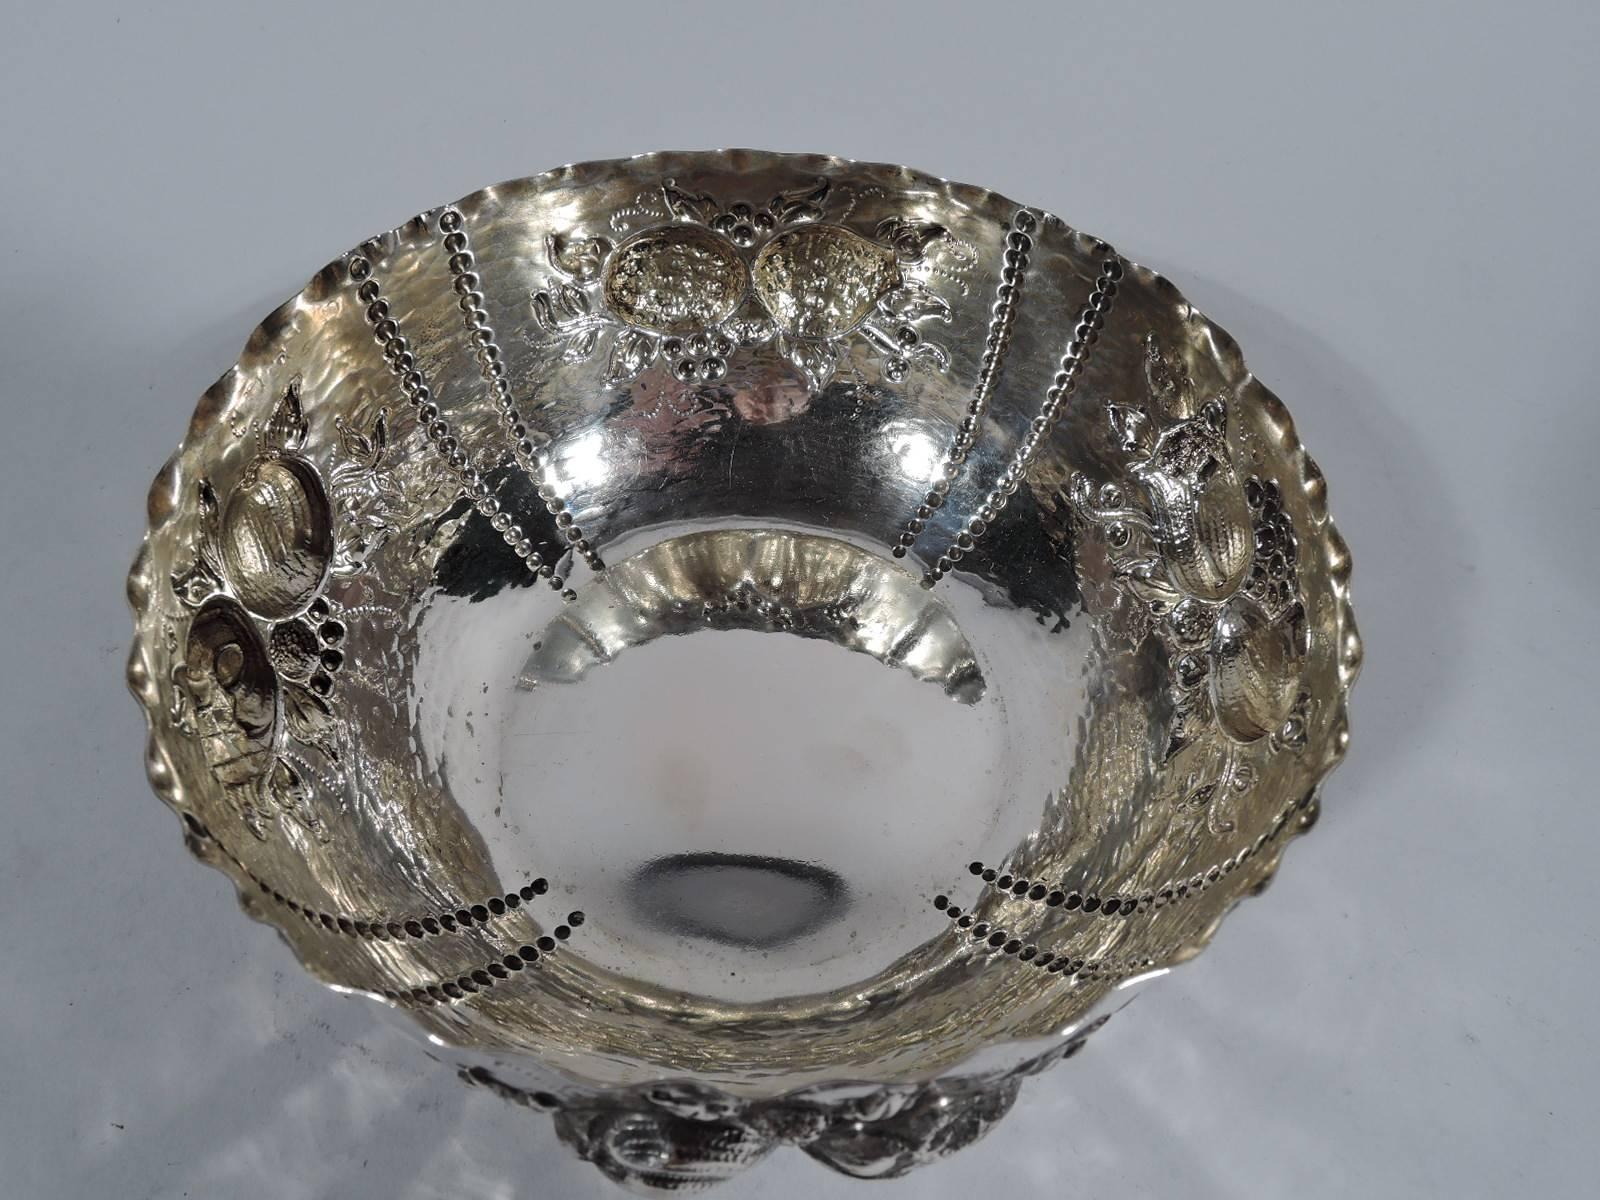 Swedish naïve-style 830 silver bowl. Made by CG Hallberg in 1914. Curved sides with repousse ornament: Fruits and berries between double beaded rows. Crimped rim and visible hand hammering. An accomplished country design by the established Stockholm